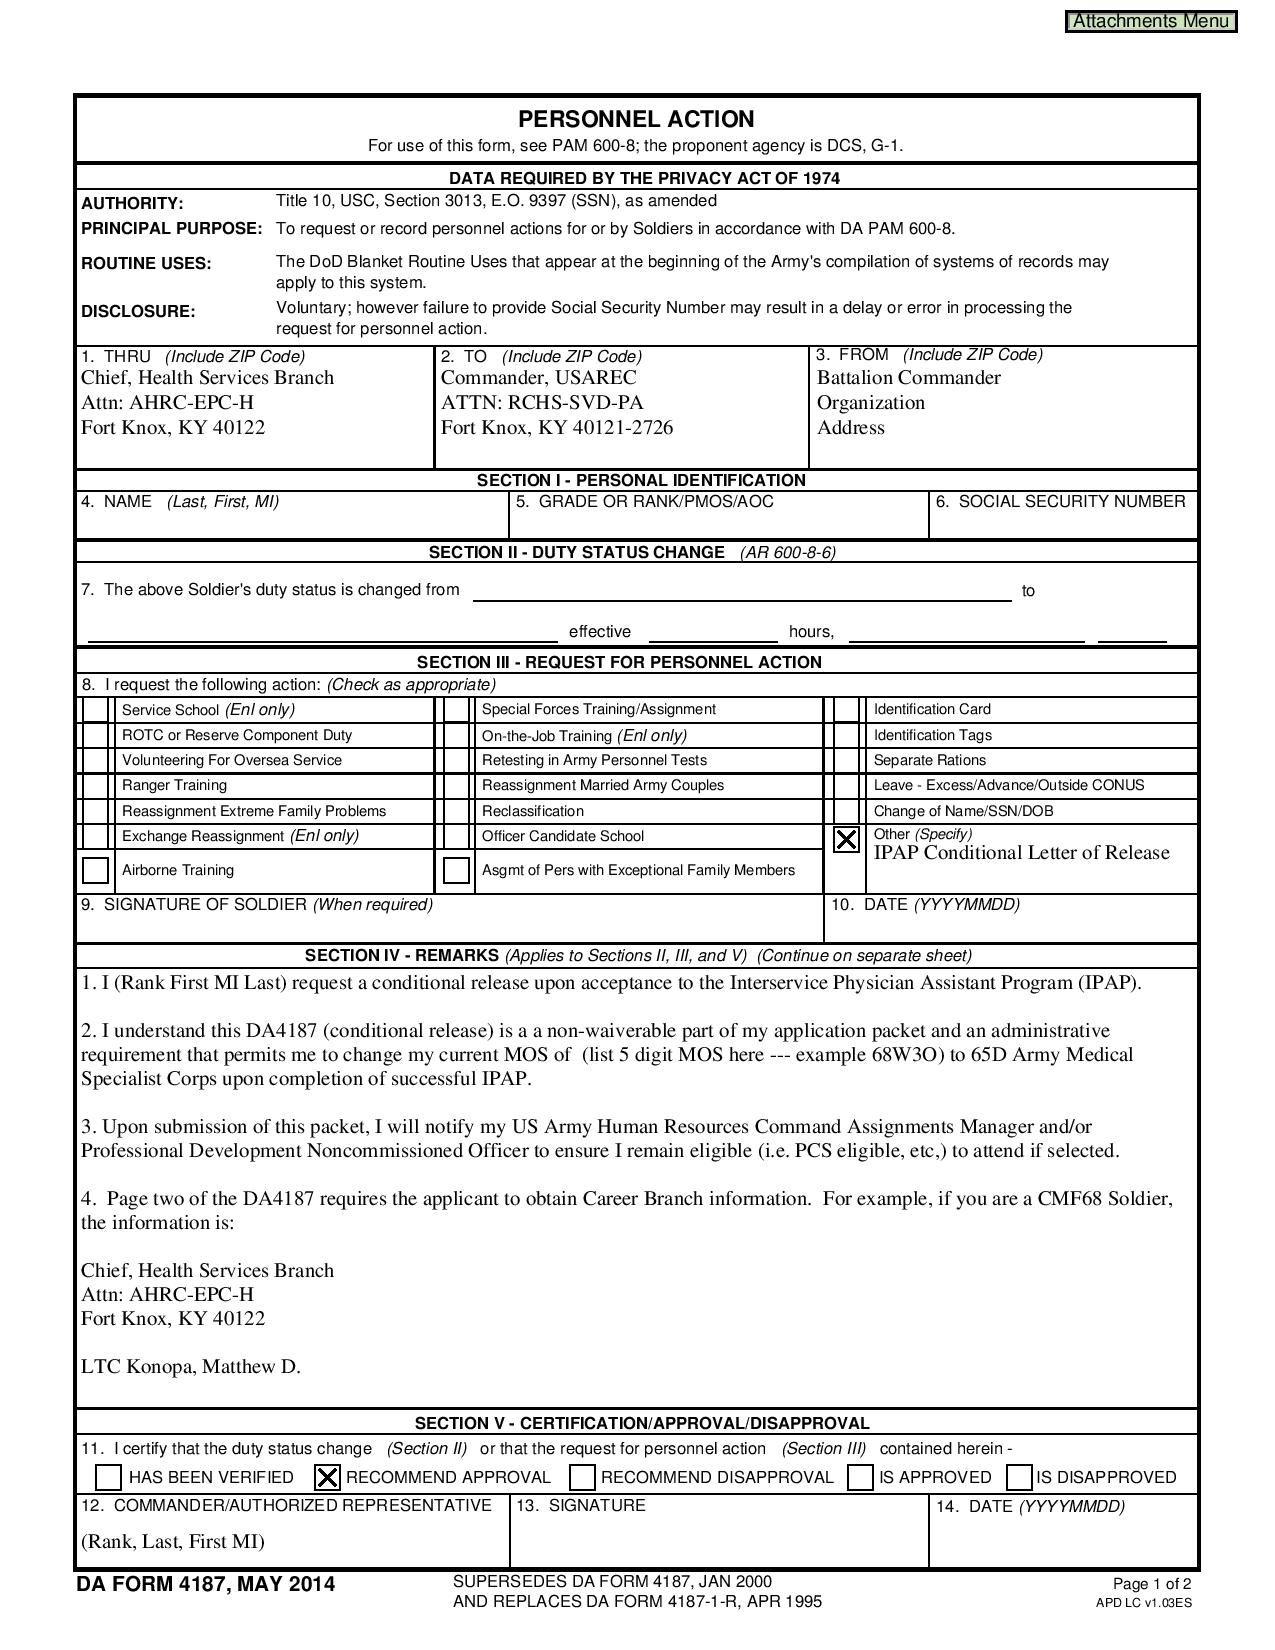 sample personnel action form page 001